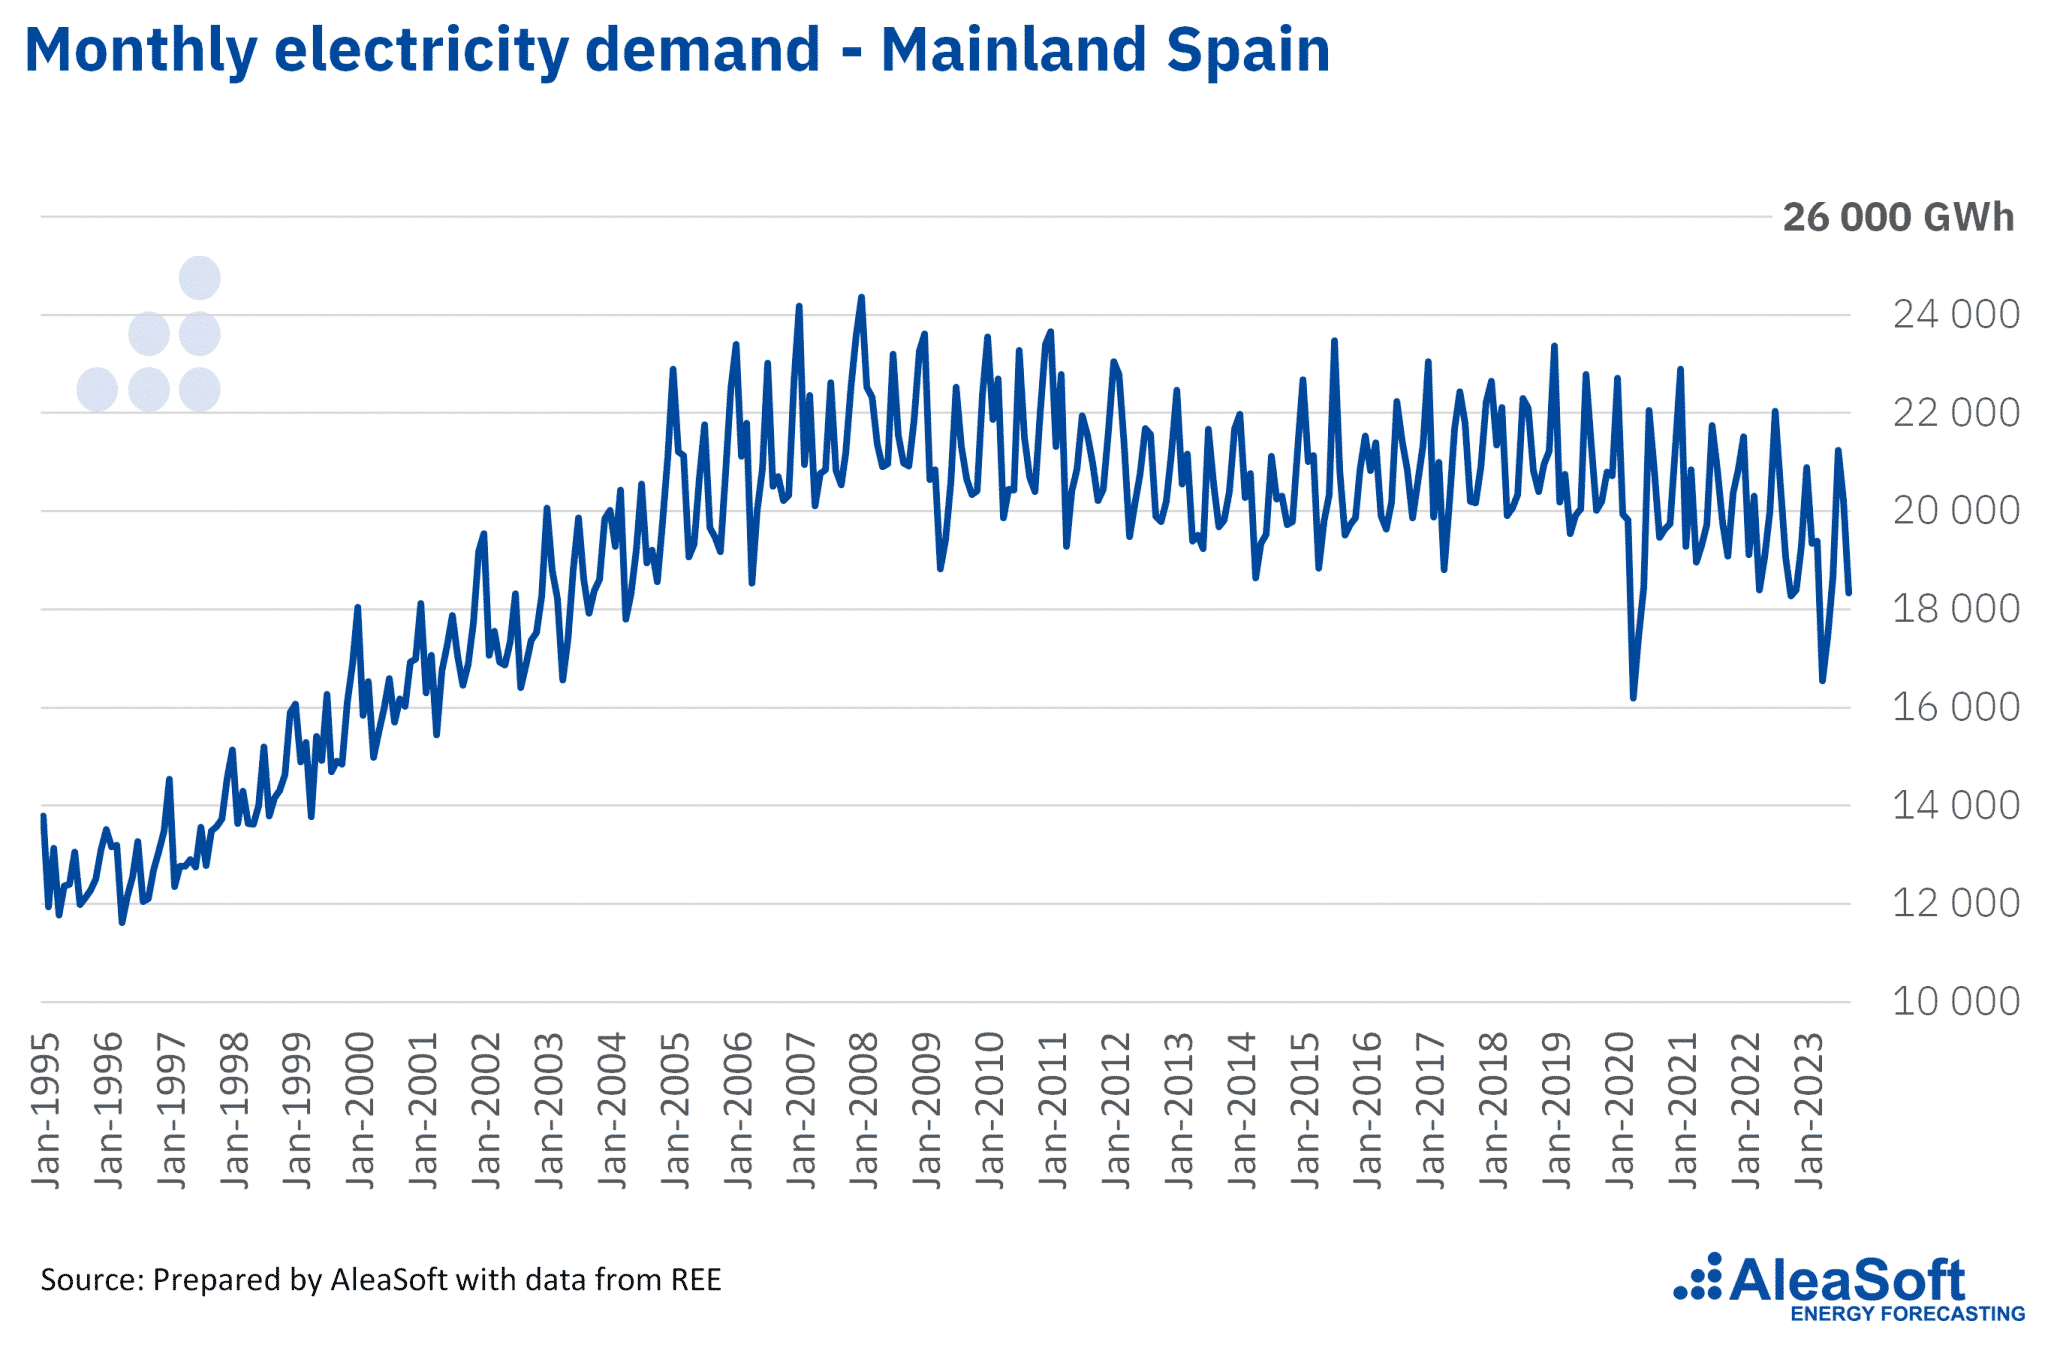 AleaSoft - monthly electricity demand Spain